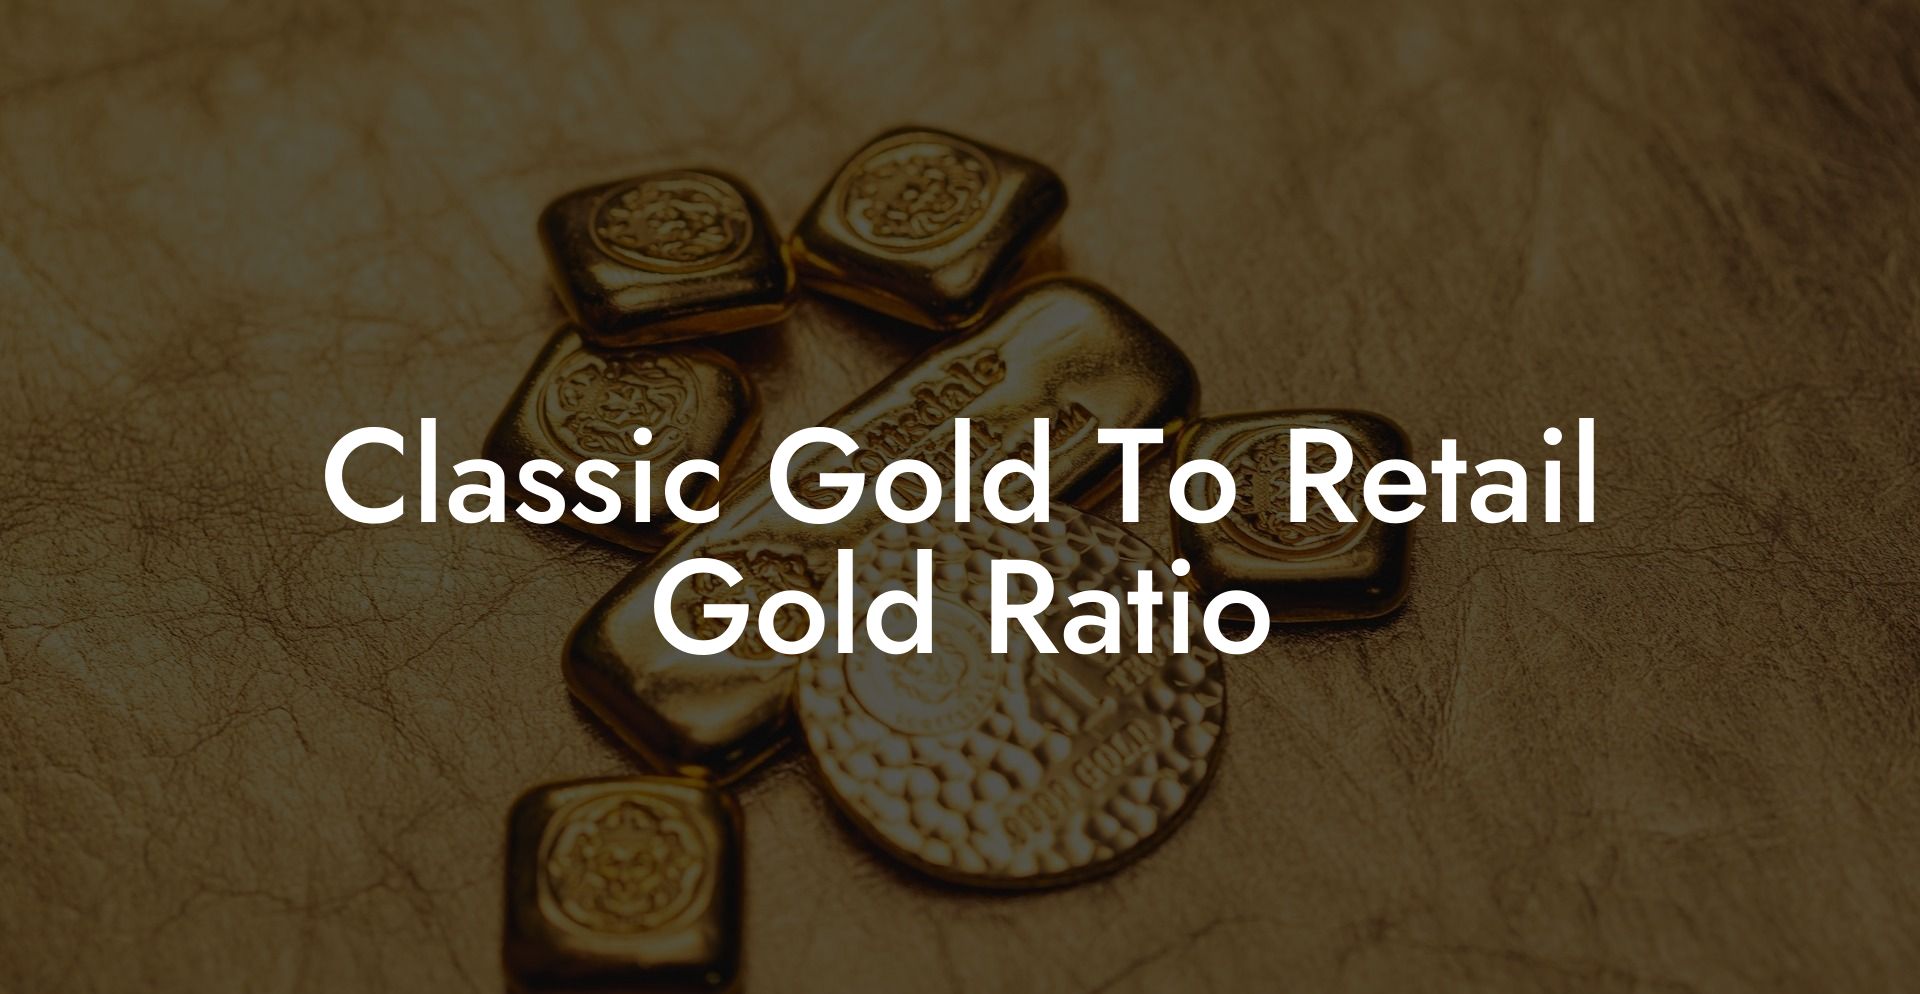 Classic Gold To Retail Gold Ratio